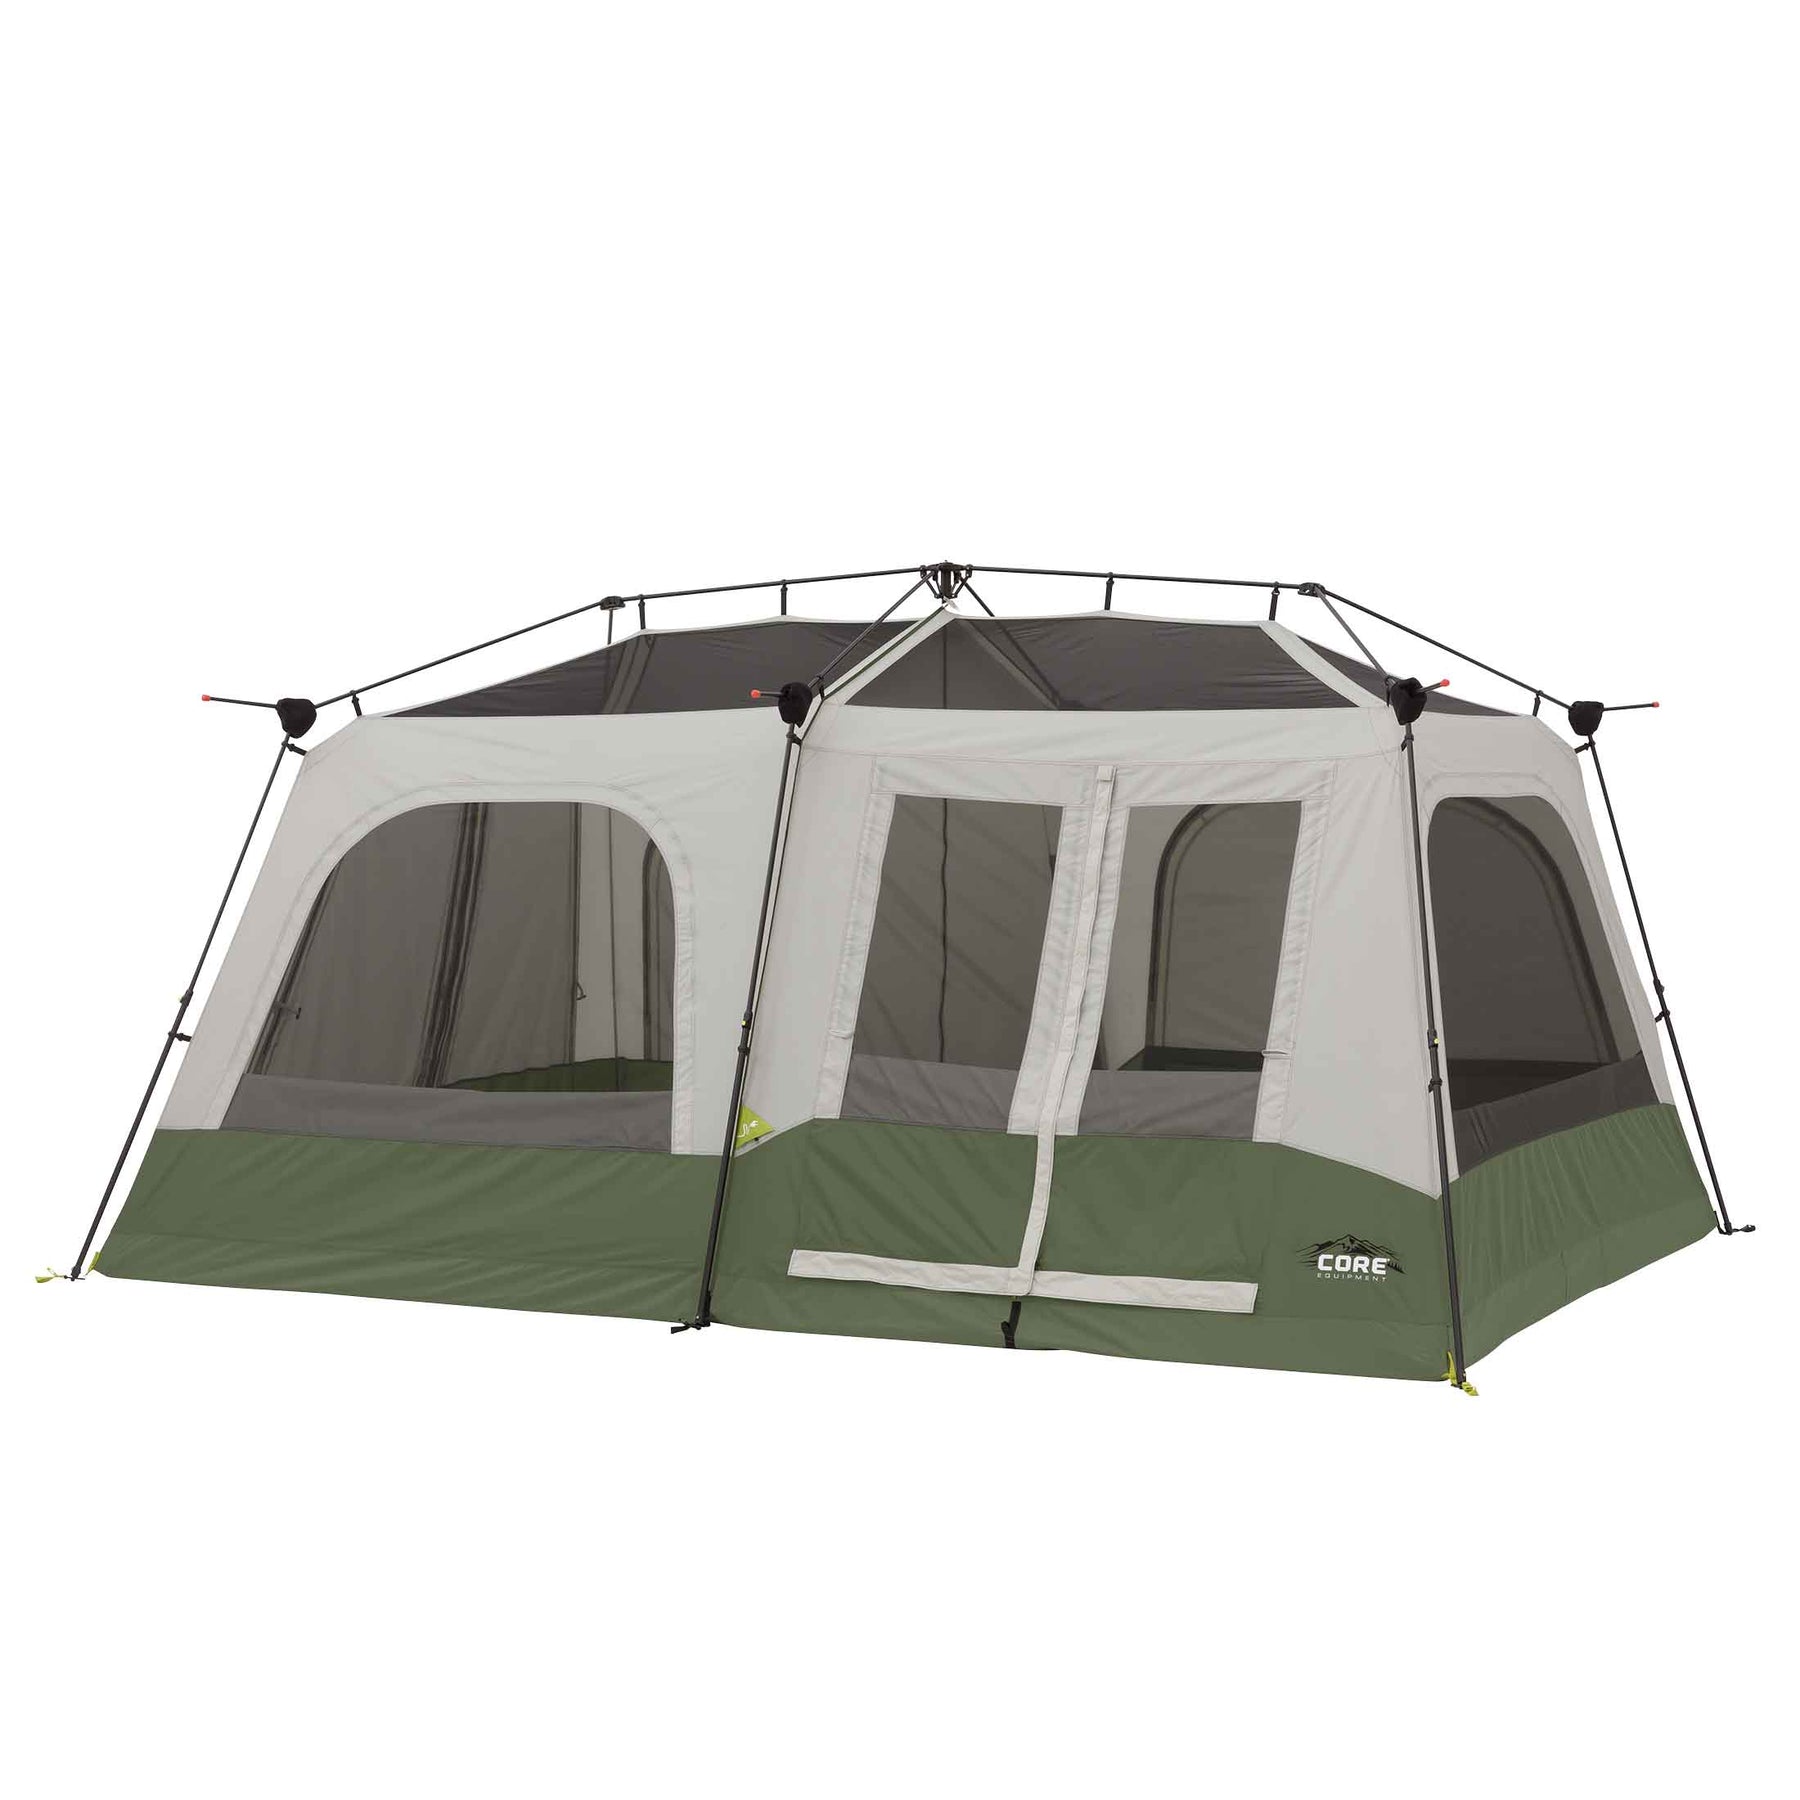 Core core 10 person tent, large multi room tent for family, included tent  gear loft organizer